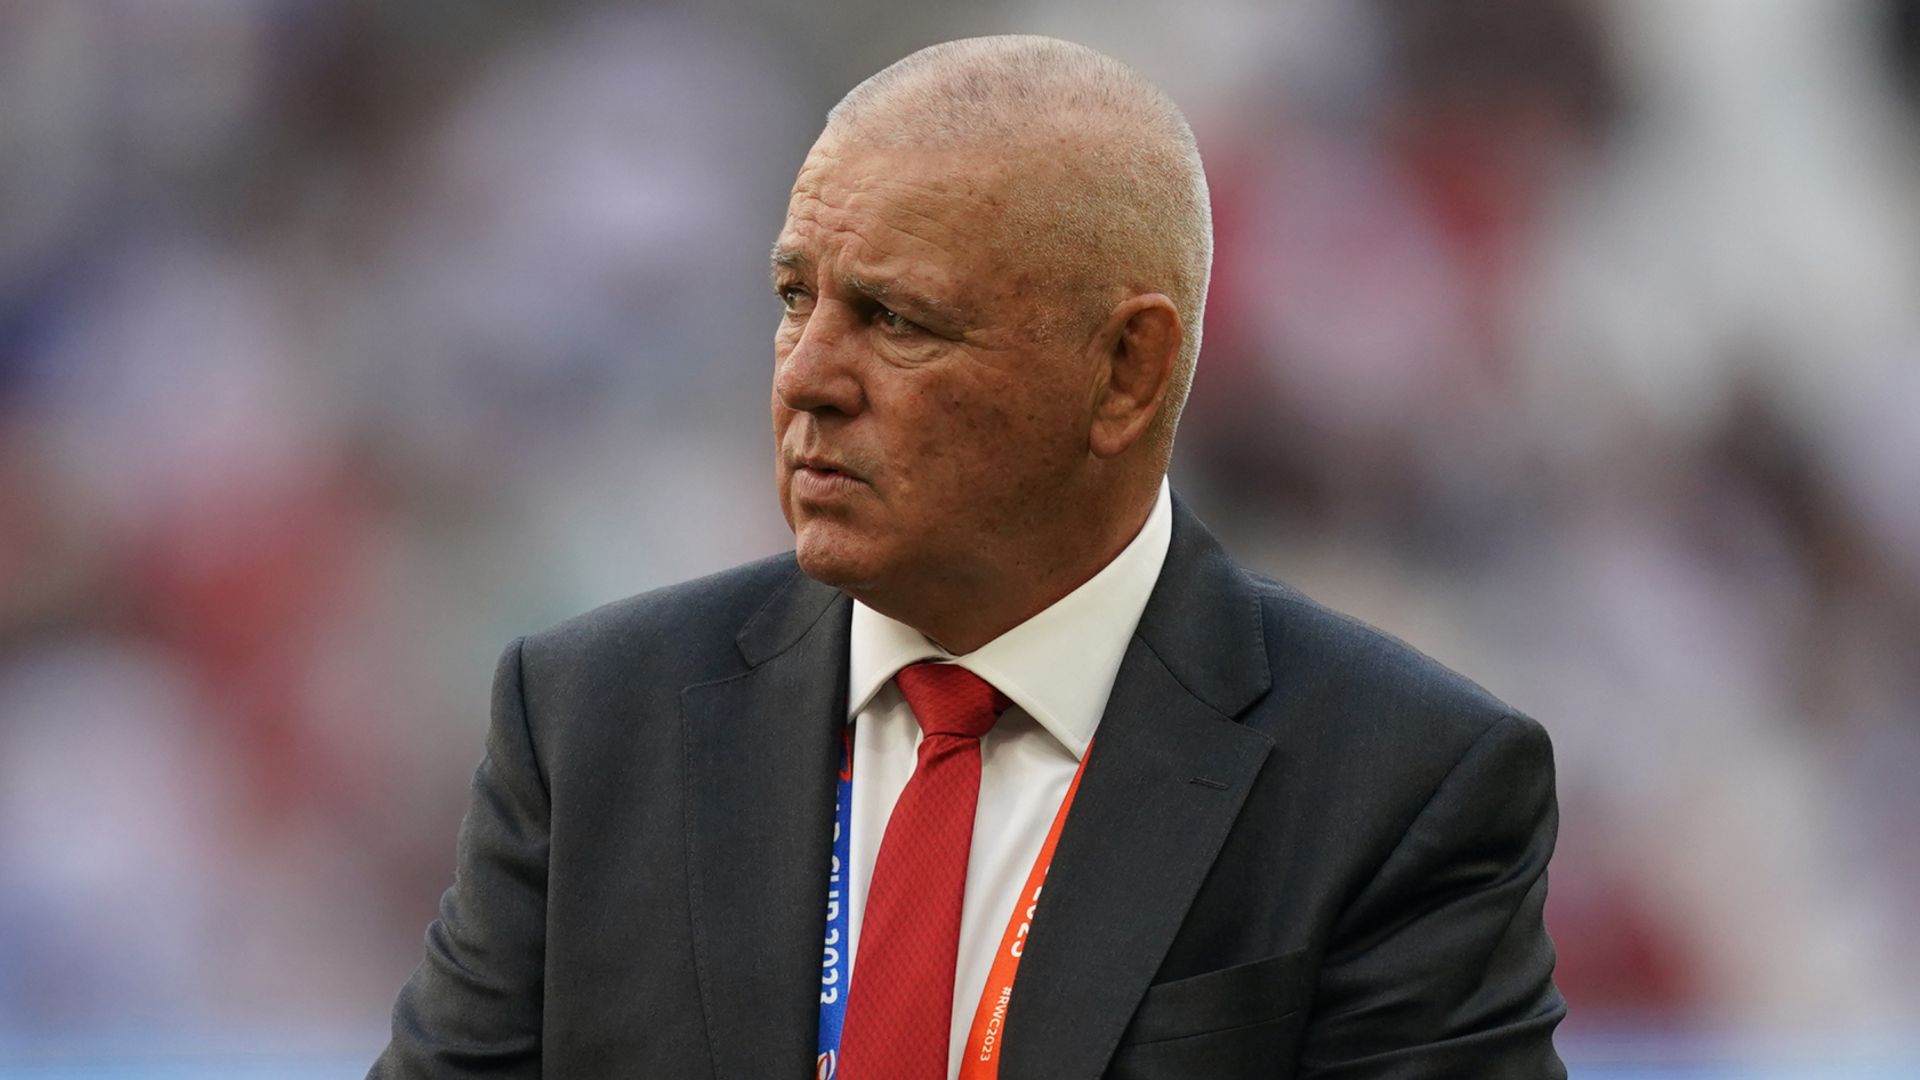 Gatland: If Wales want to get rid of me, it's up to them